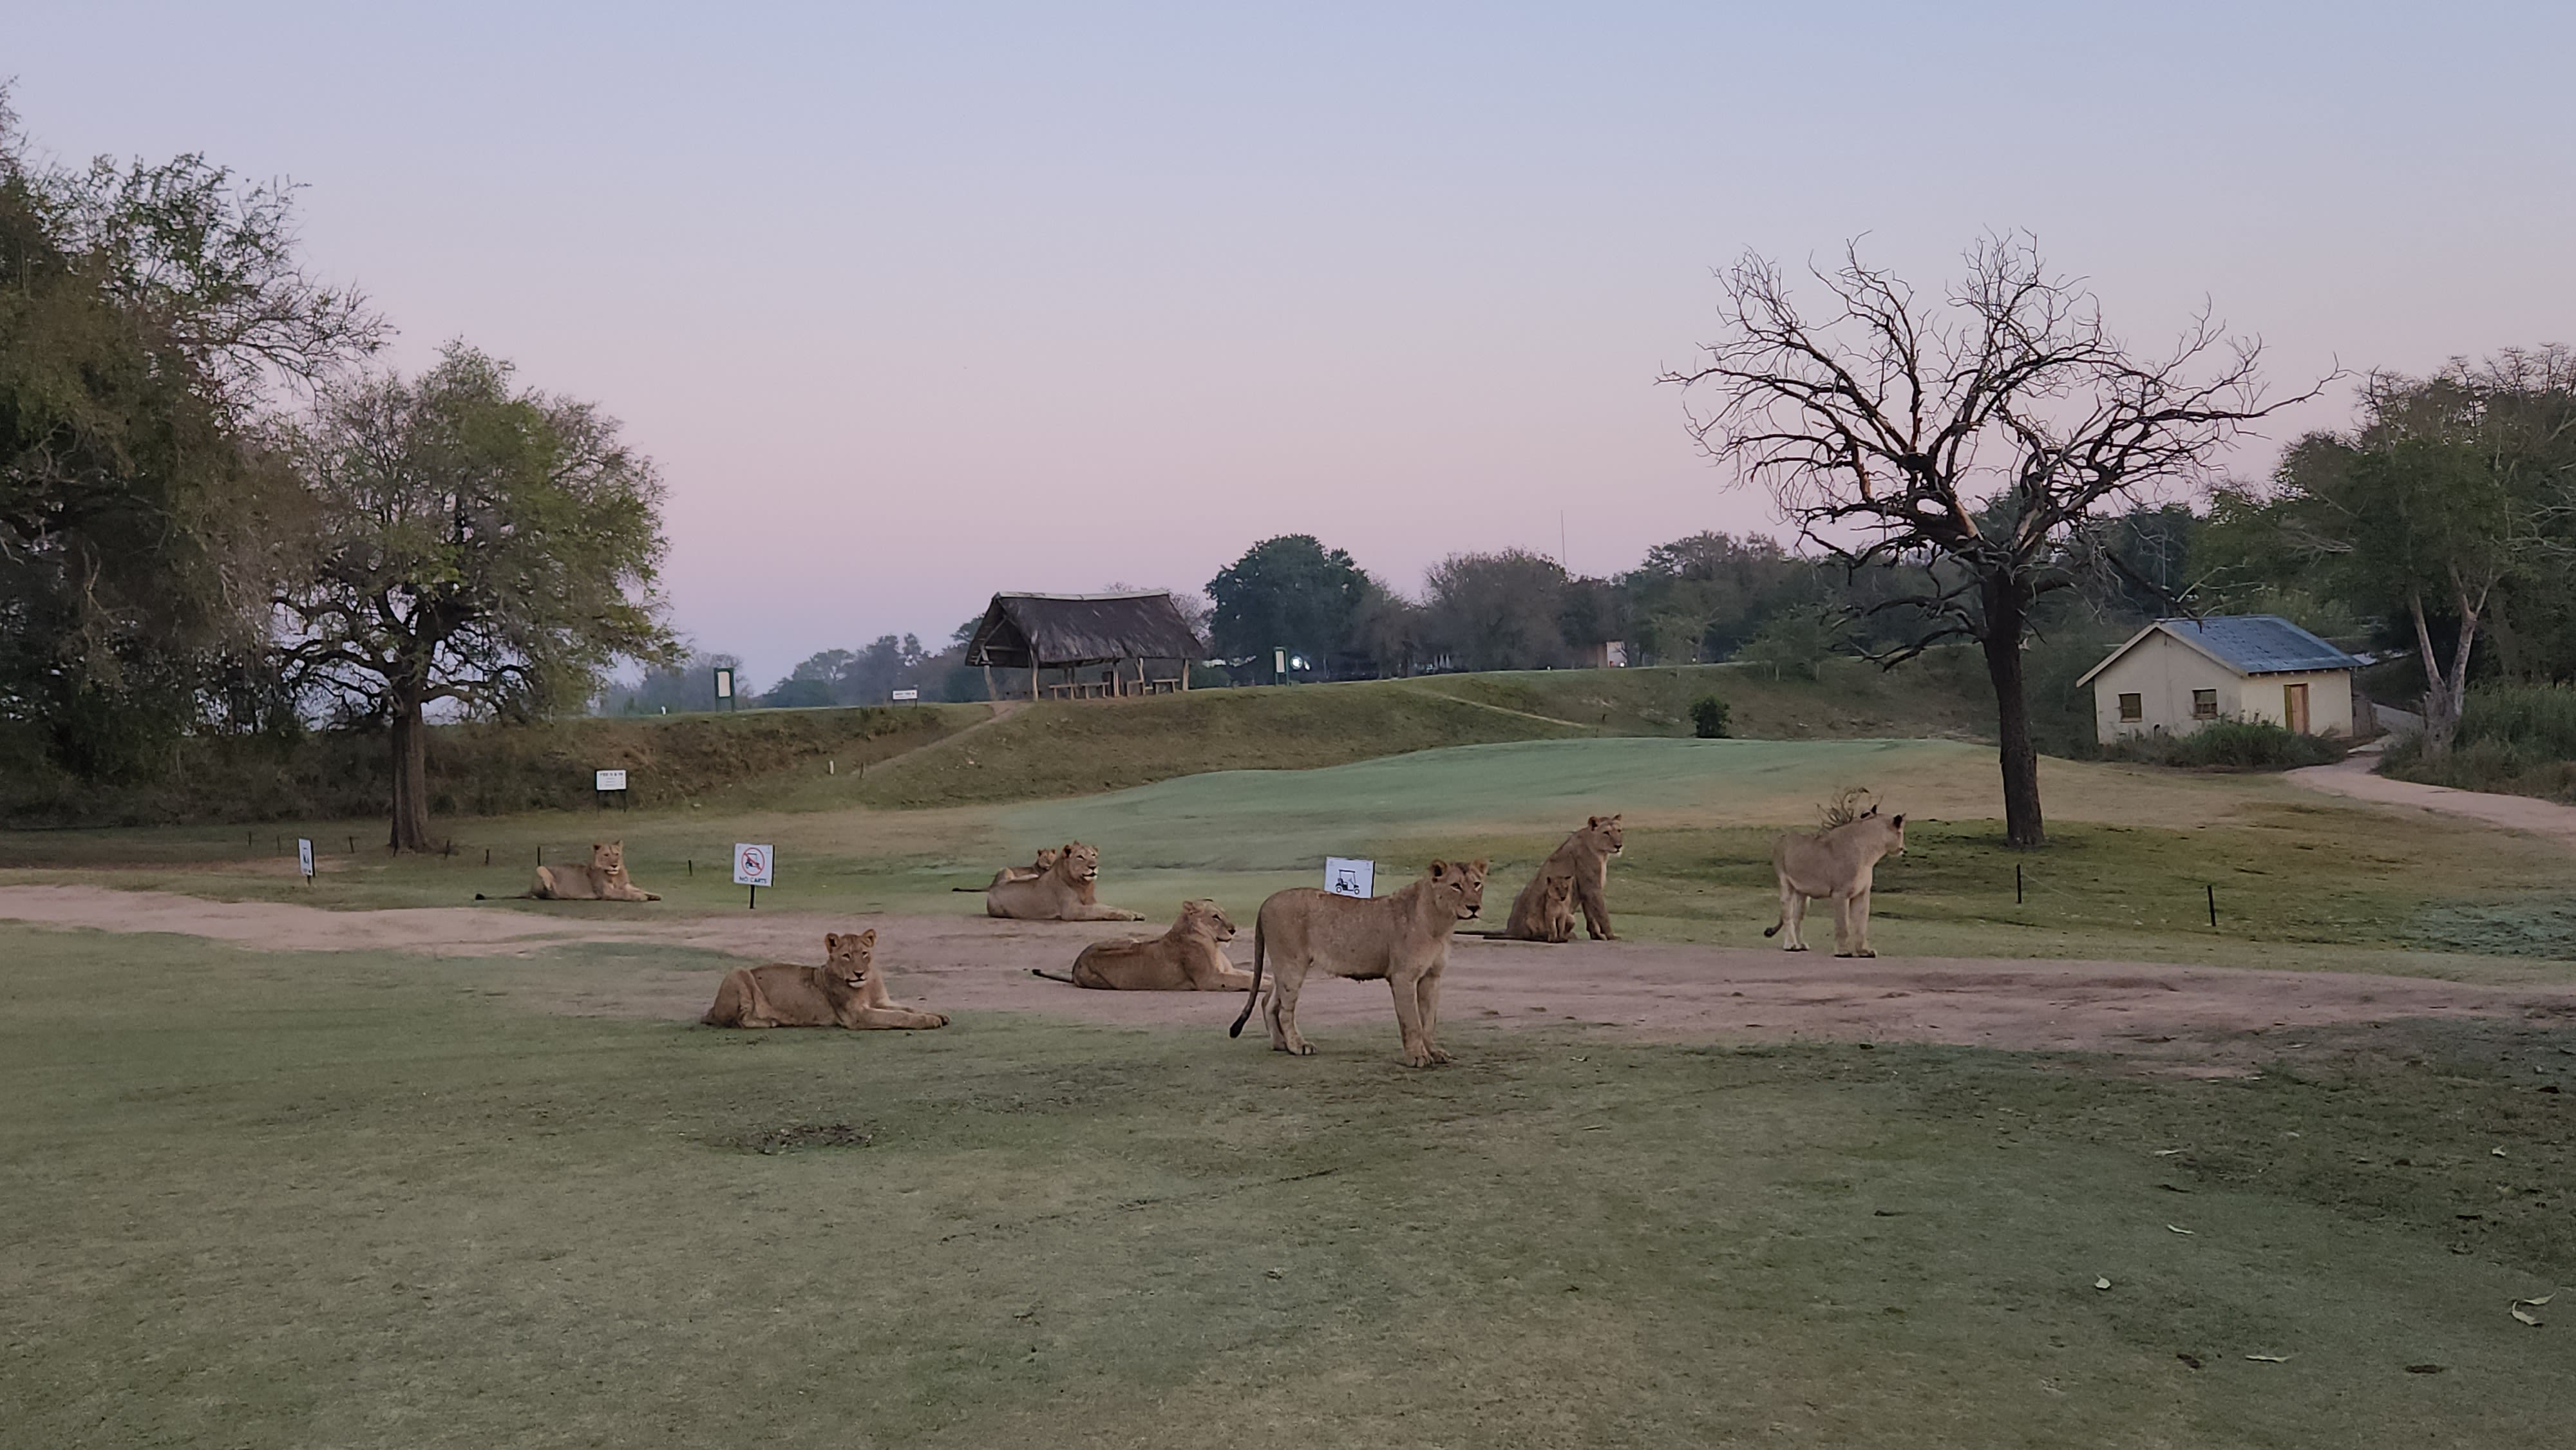 Lions deal relatively little damage to the course compared with other animals.